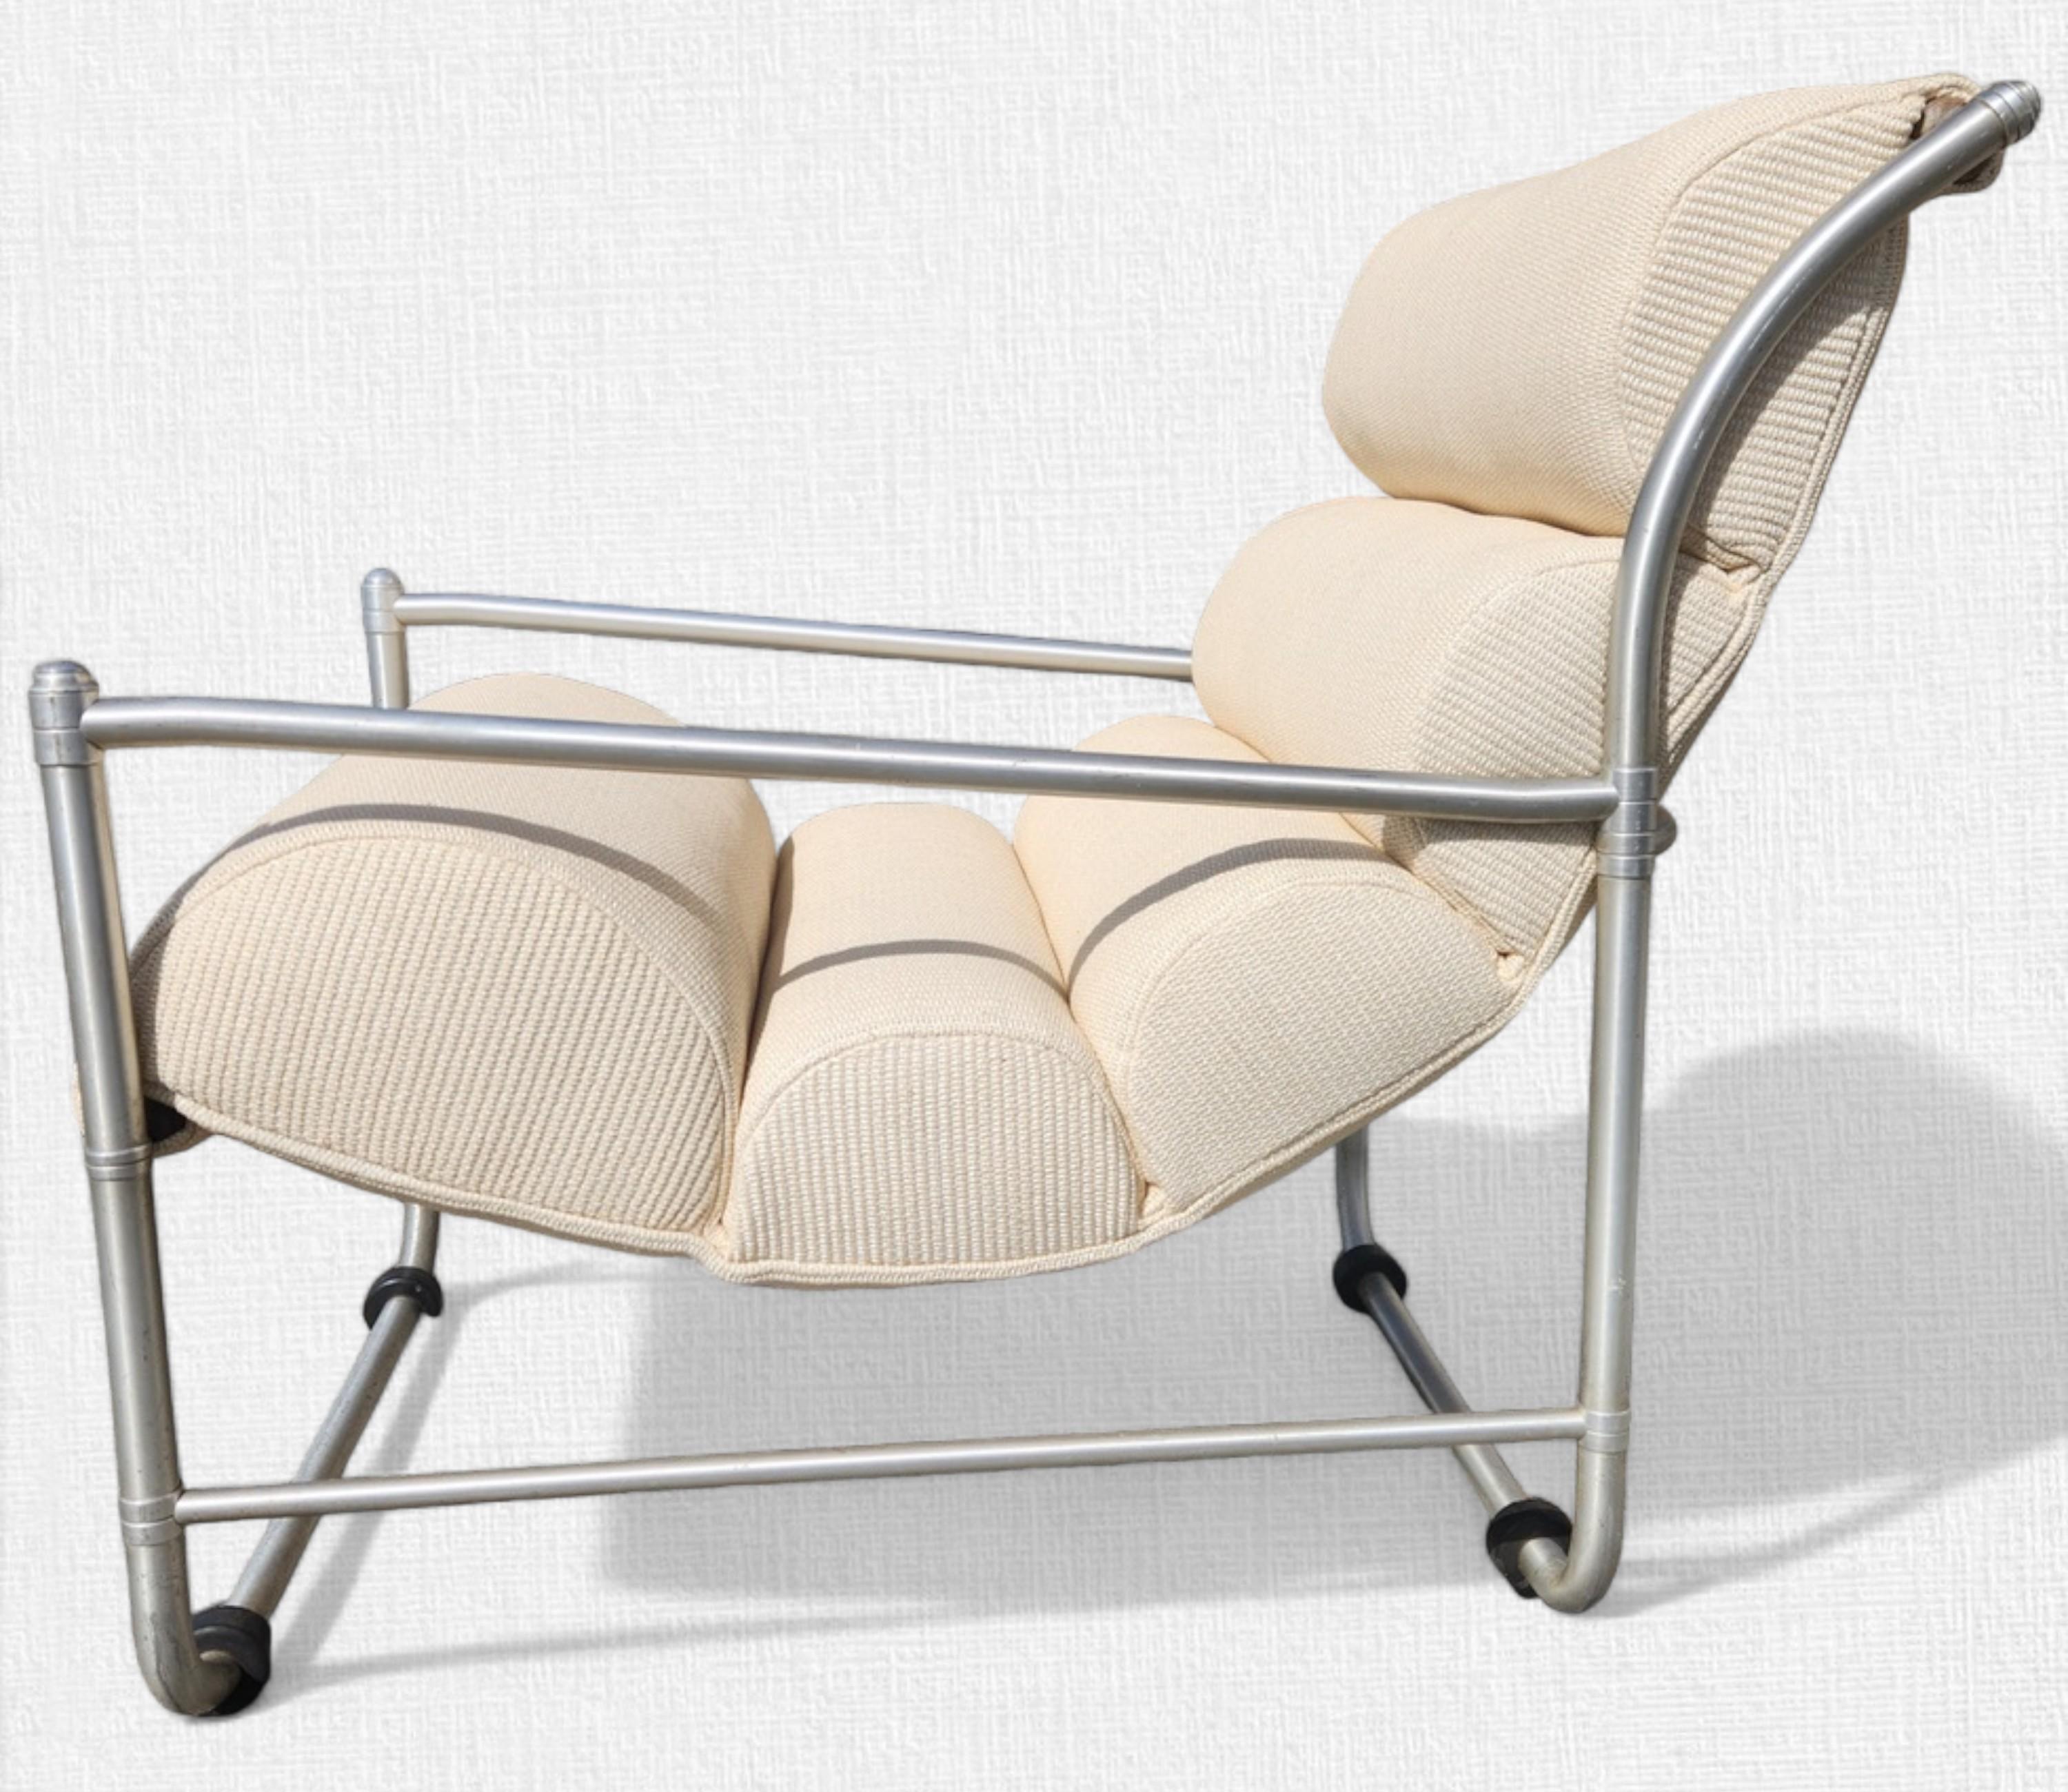 Pair of Aluminum Warren McArthur Sling Chaises / Lounge Chairs, 1938 For Sale 1